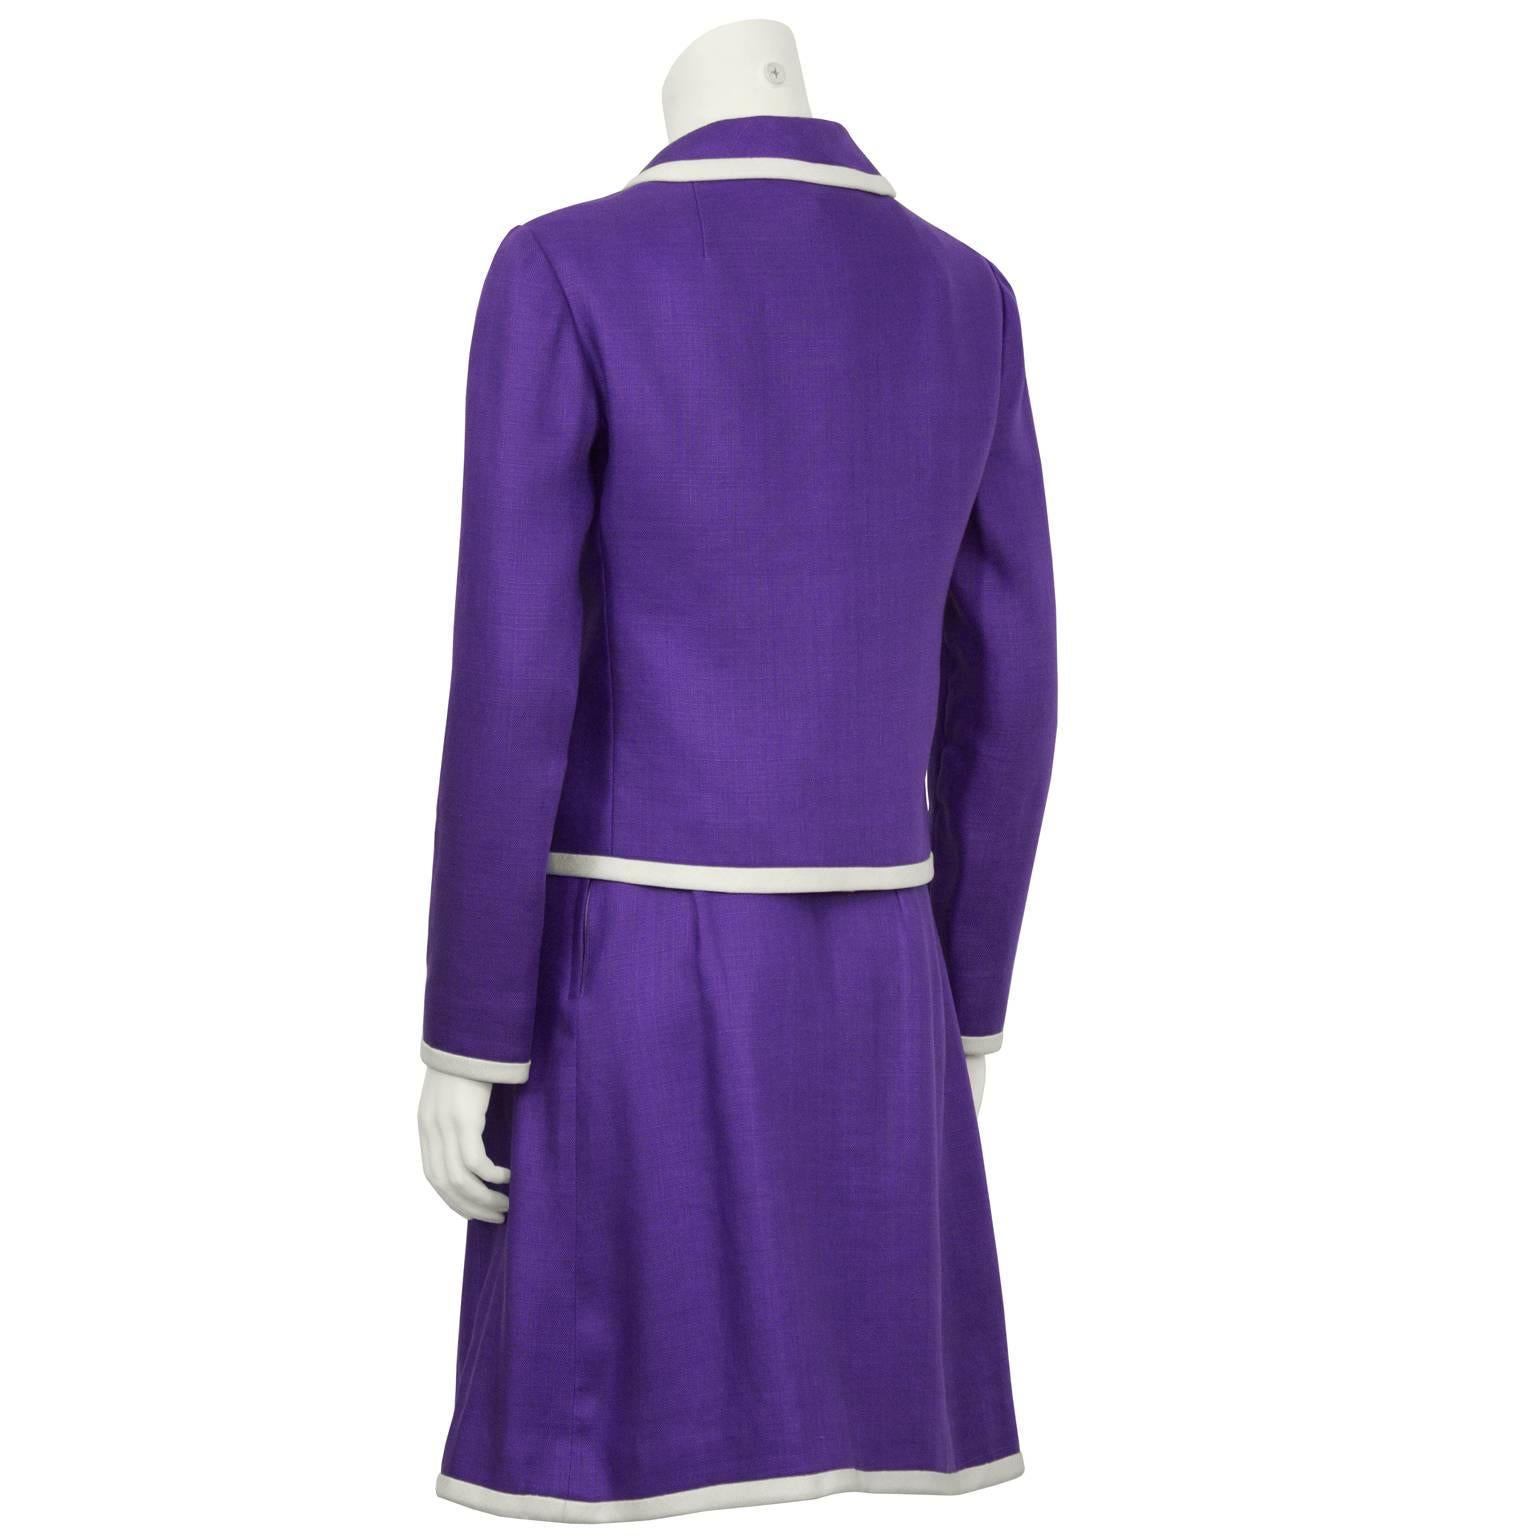 Adorable Donald Brooks purple linen 3-piece skirt suit from the 1960's. The suit is detailed throughout with white piping along the hem, collars, and pockets. The crop-style jacket buttons down the front with cream buttons. The matching shell has a